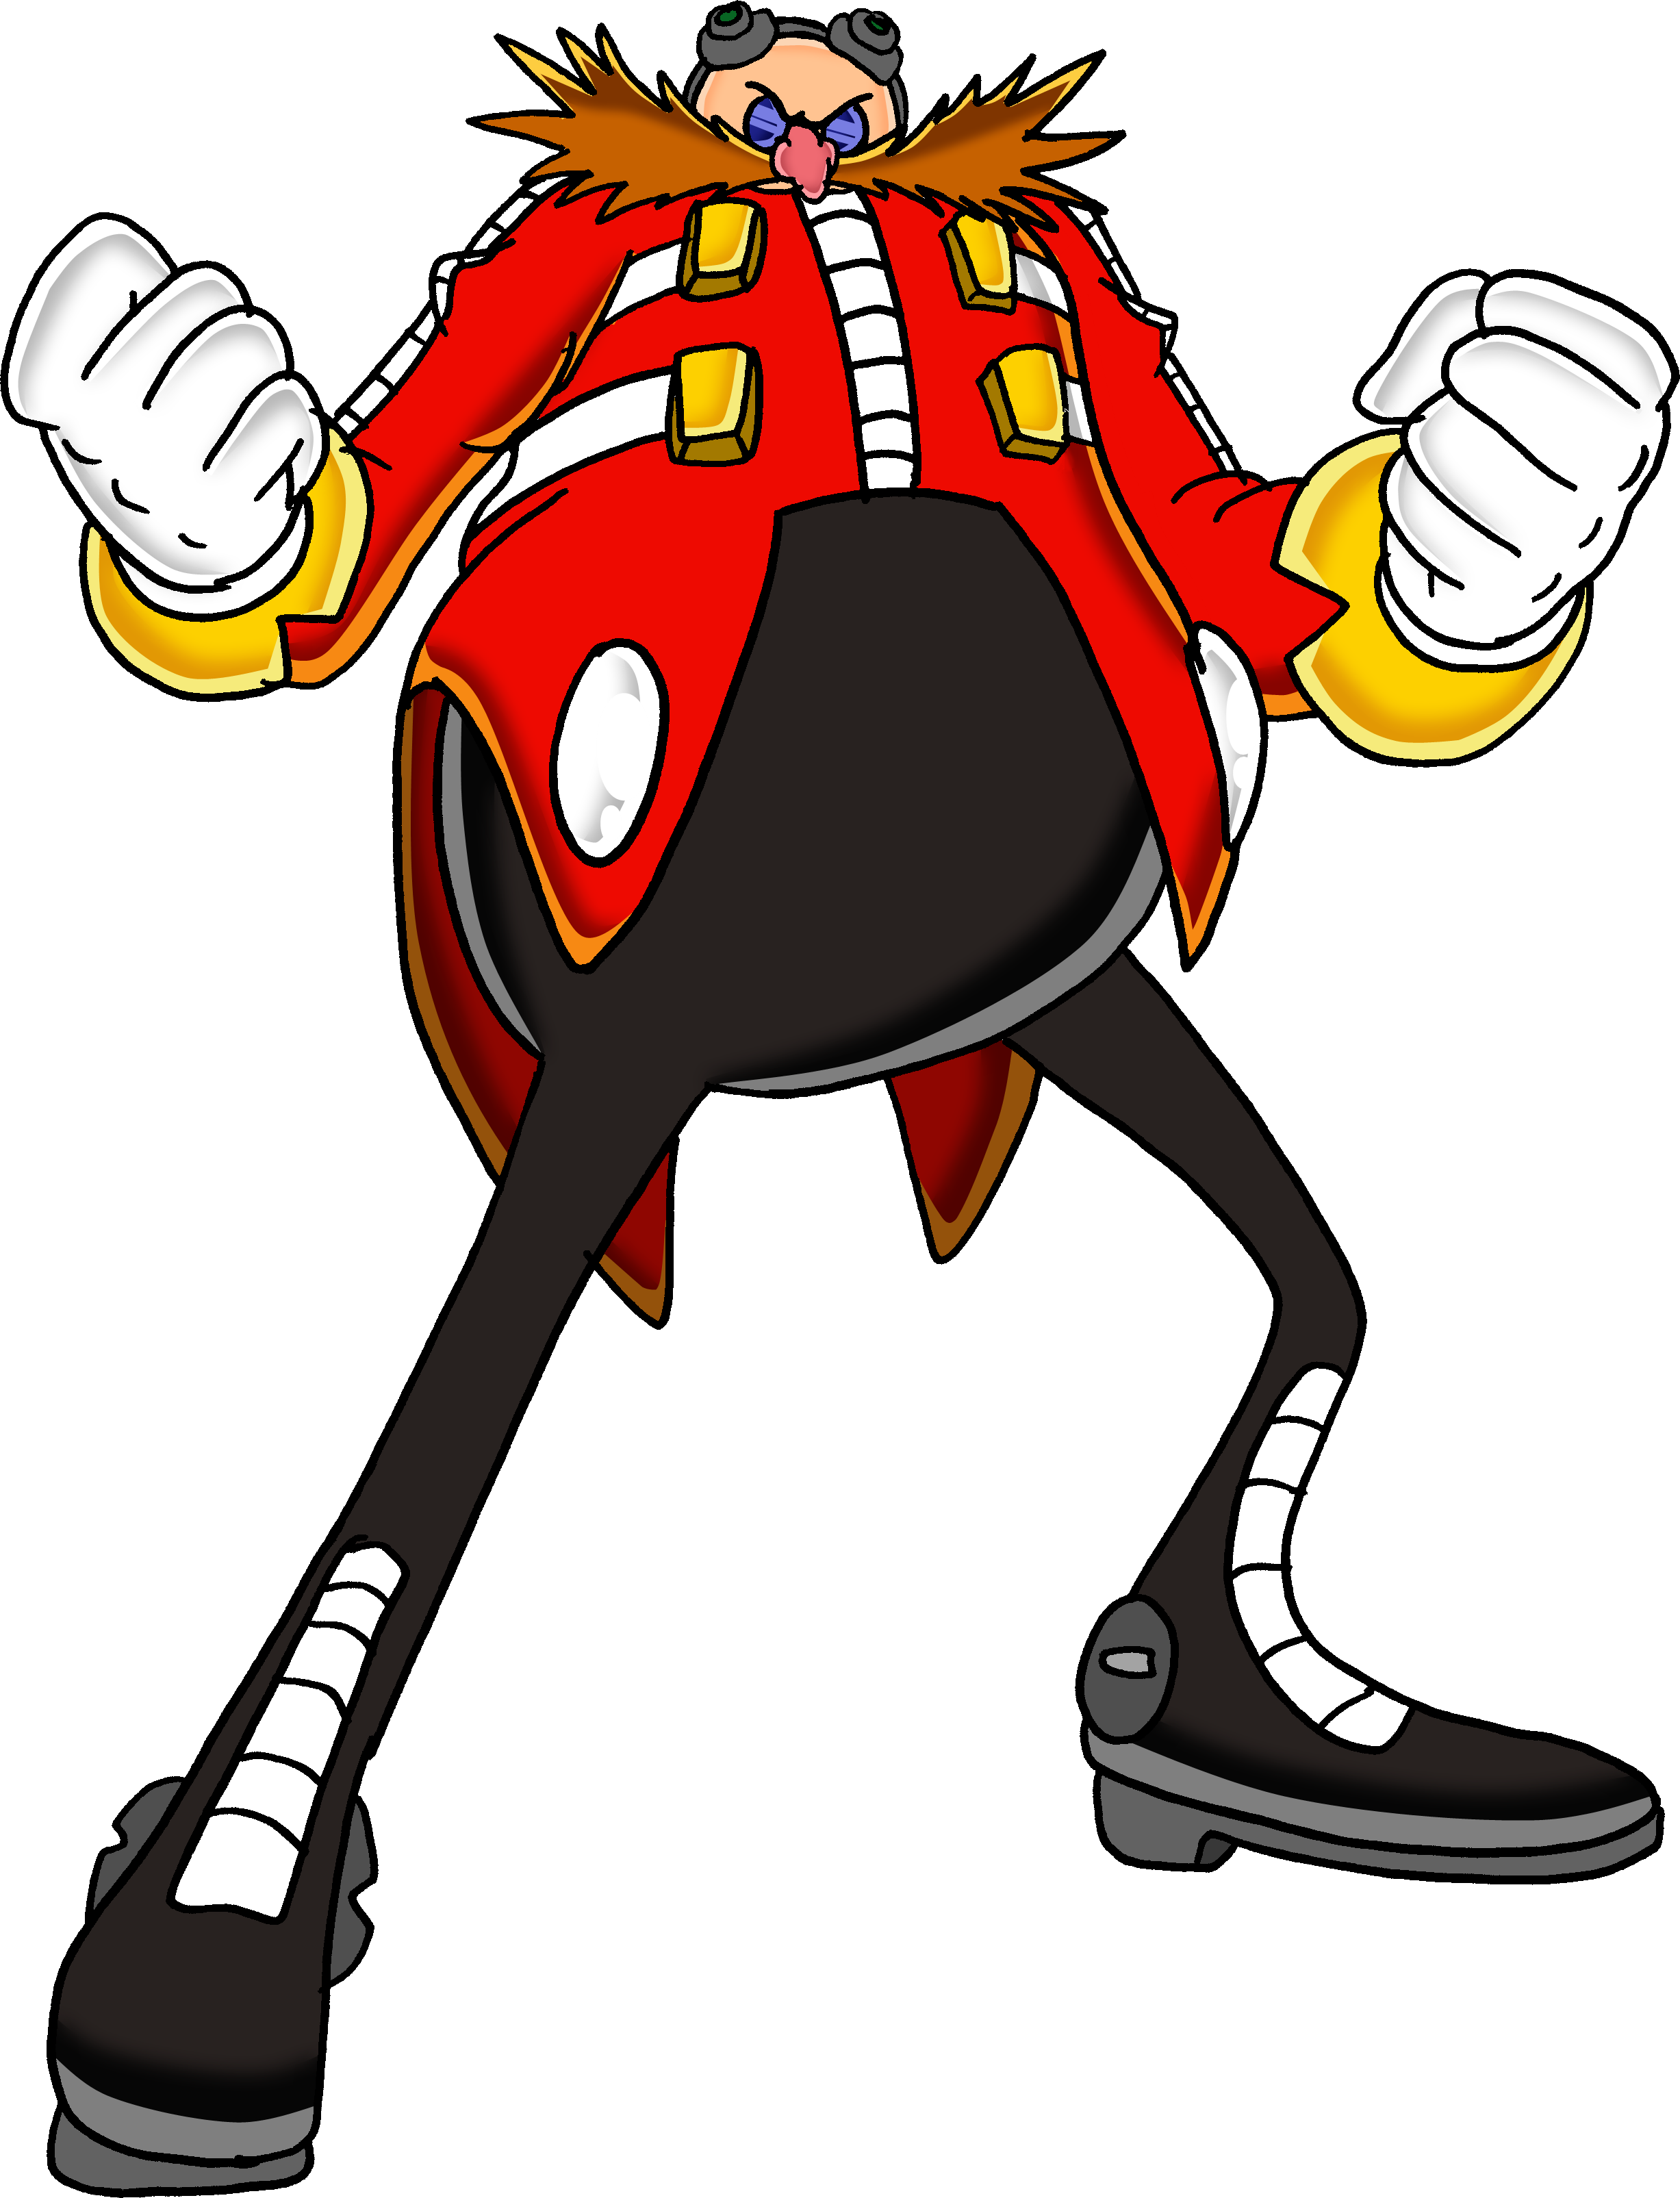 Download and share clipart about Doctor Eggman Sonic The Hedgehog Sonic Adv...